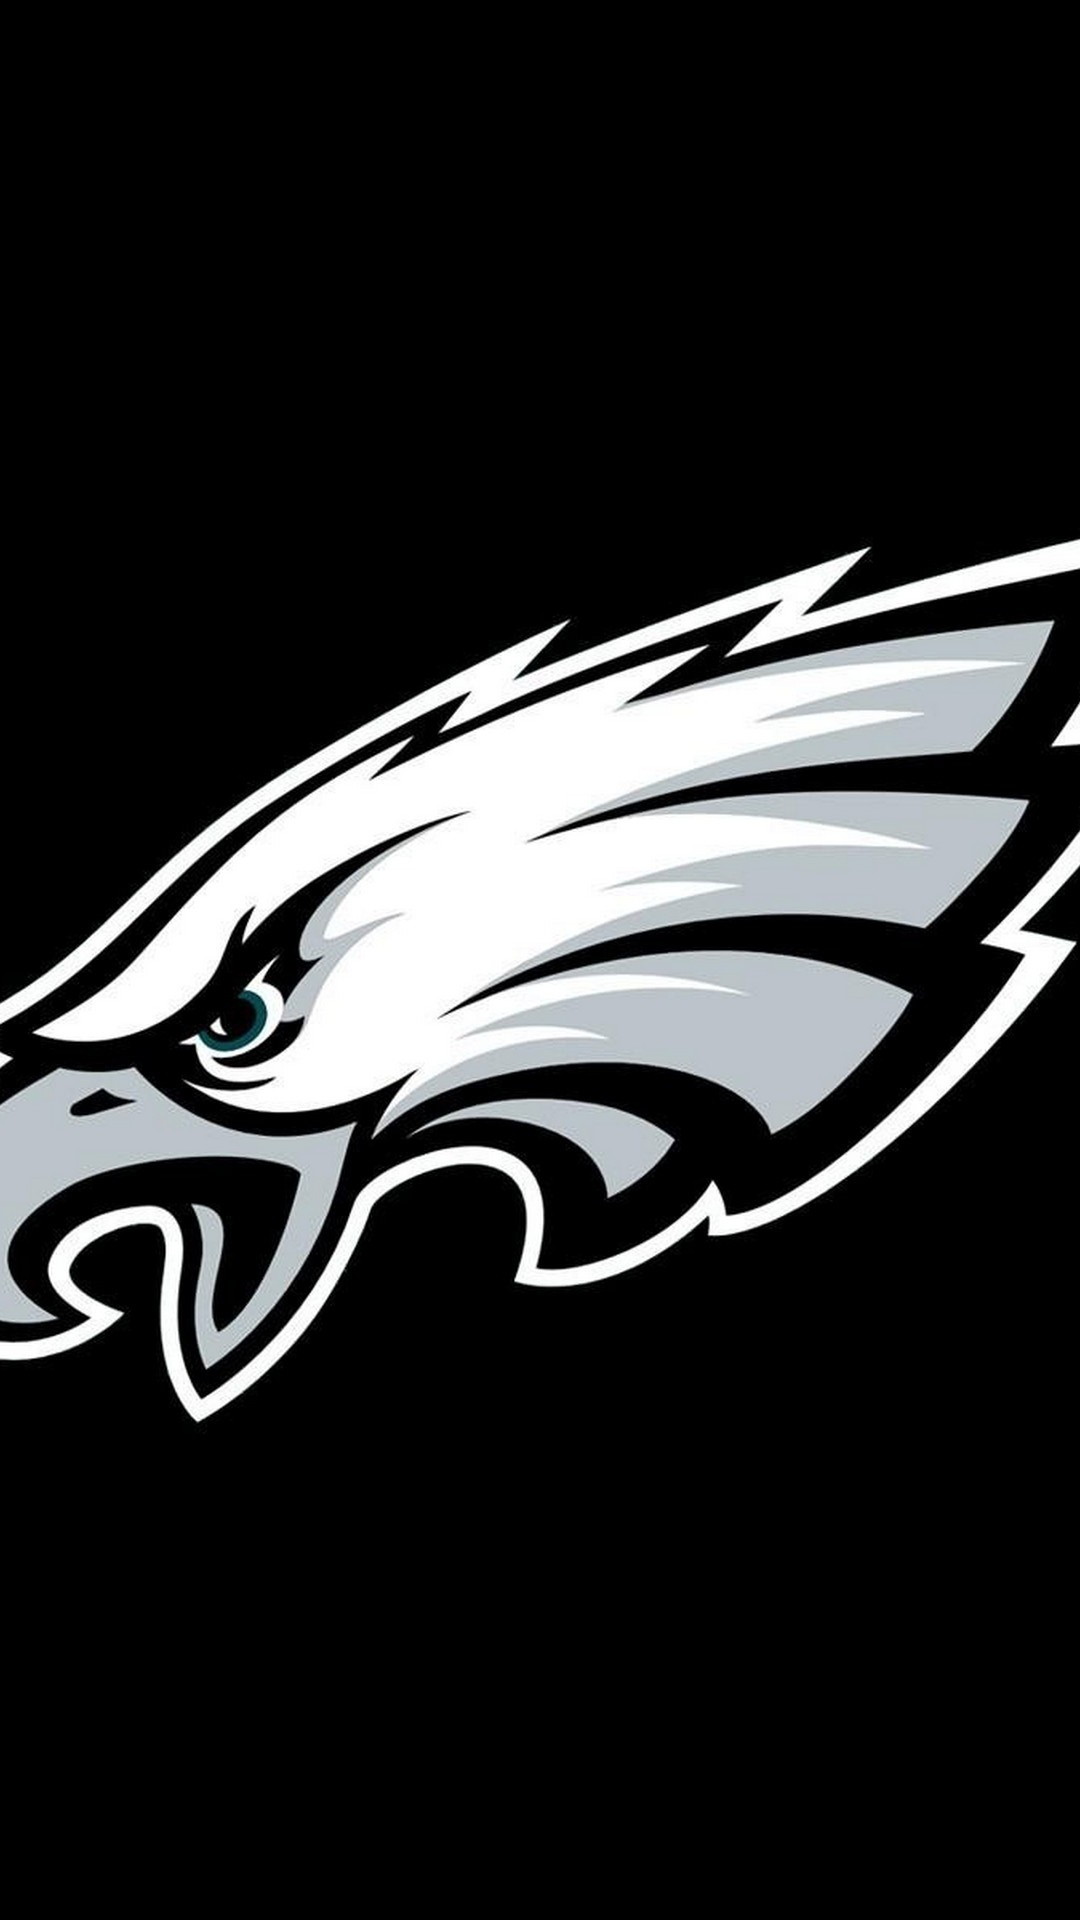 Apple Philadelphia Eagles iPhone Wallpaper With high-resolution 1080X1920 pixel. Donwload and set as wallpaper for your iPhone X, iPhone XS home screen backgrounds, XS Max, XR, iPhone8 lock screen wallpaper, iPhone 7, 6, SE, and other mobile devices